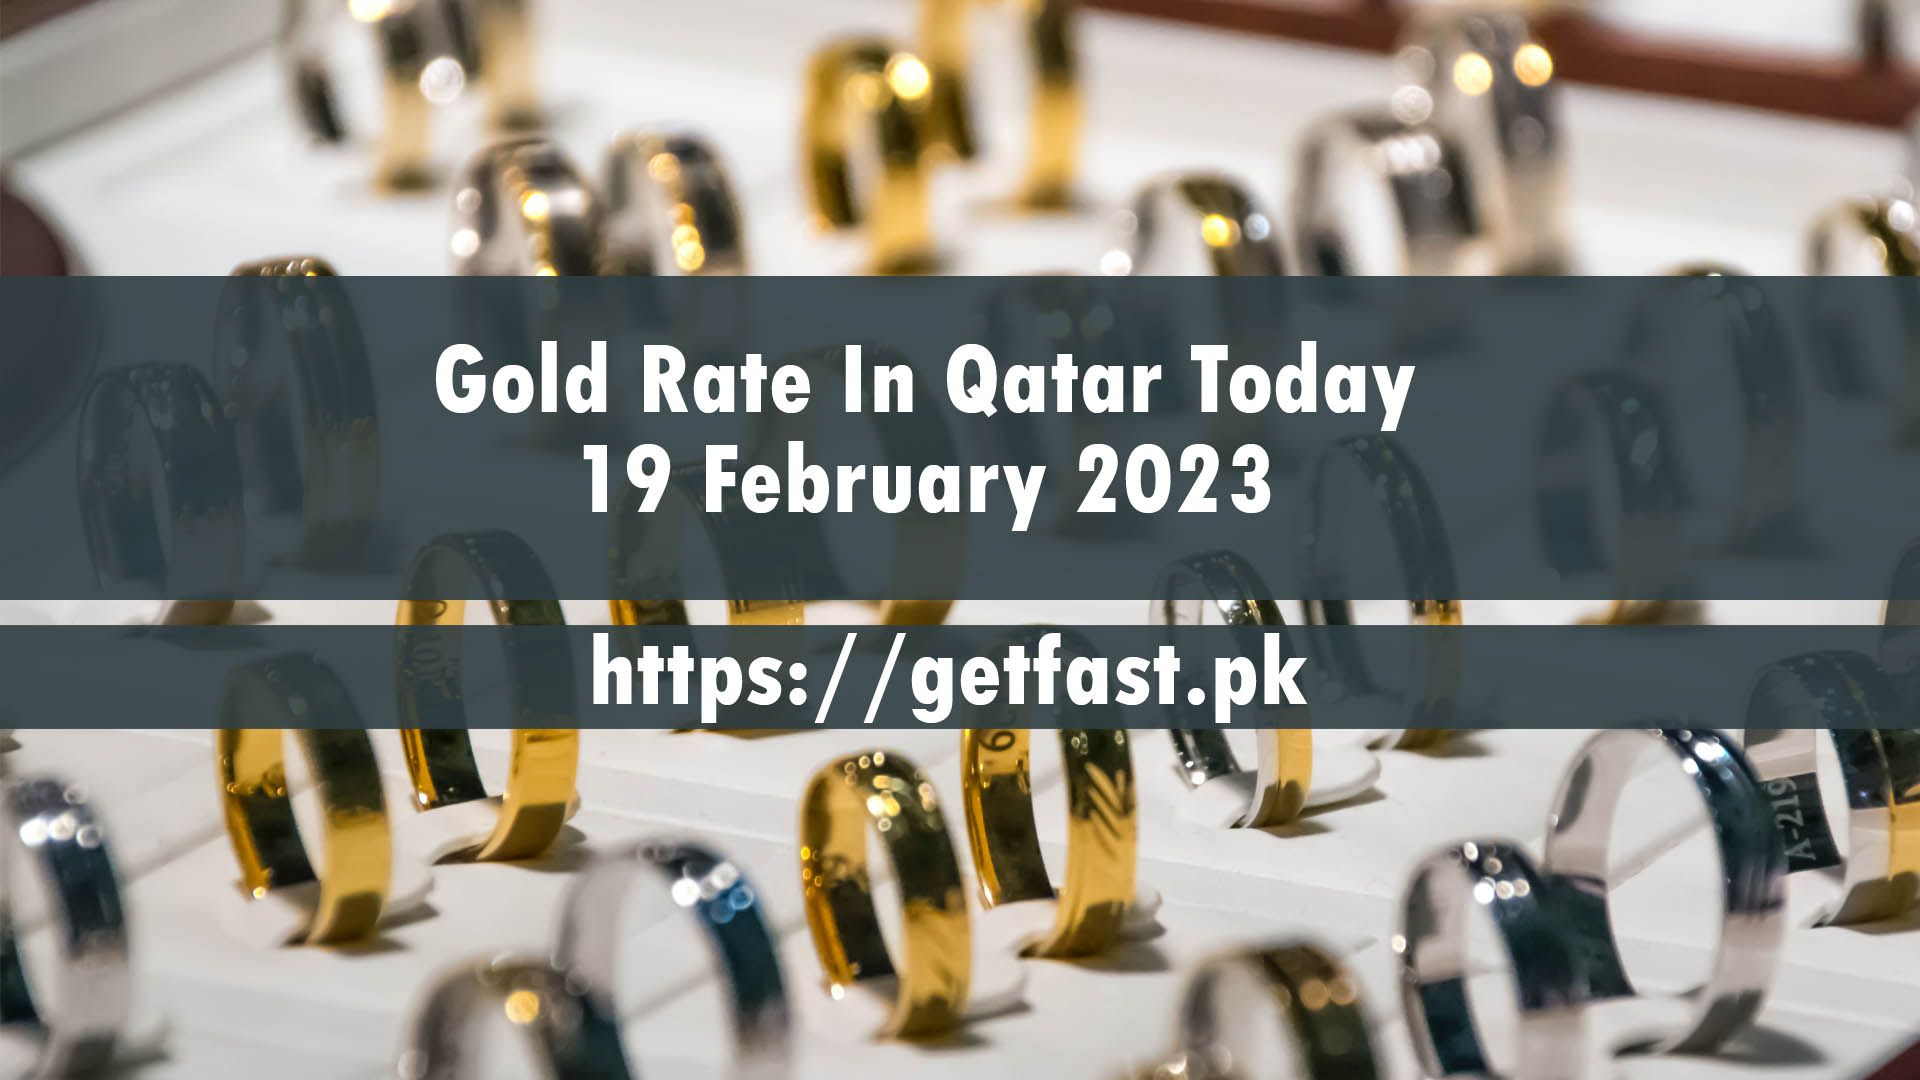 Gold Rate In Qatar Today 19 February 2023